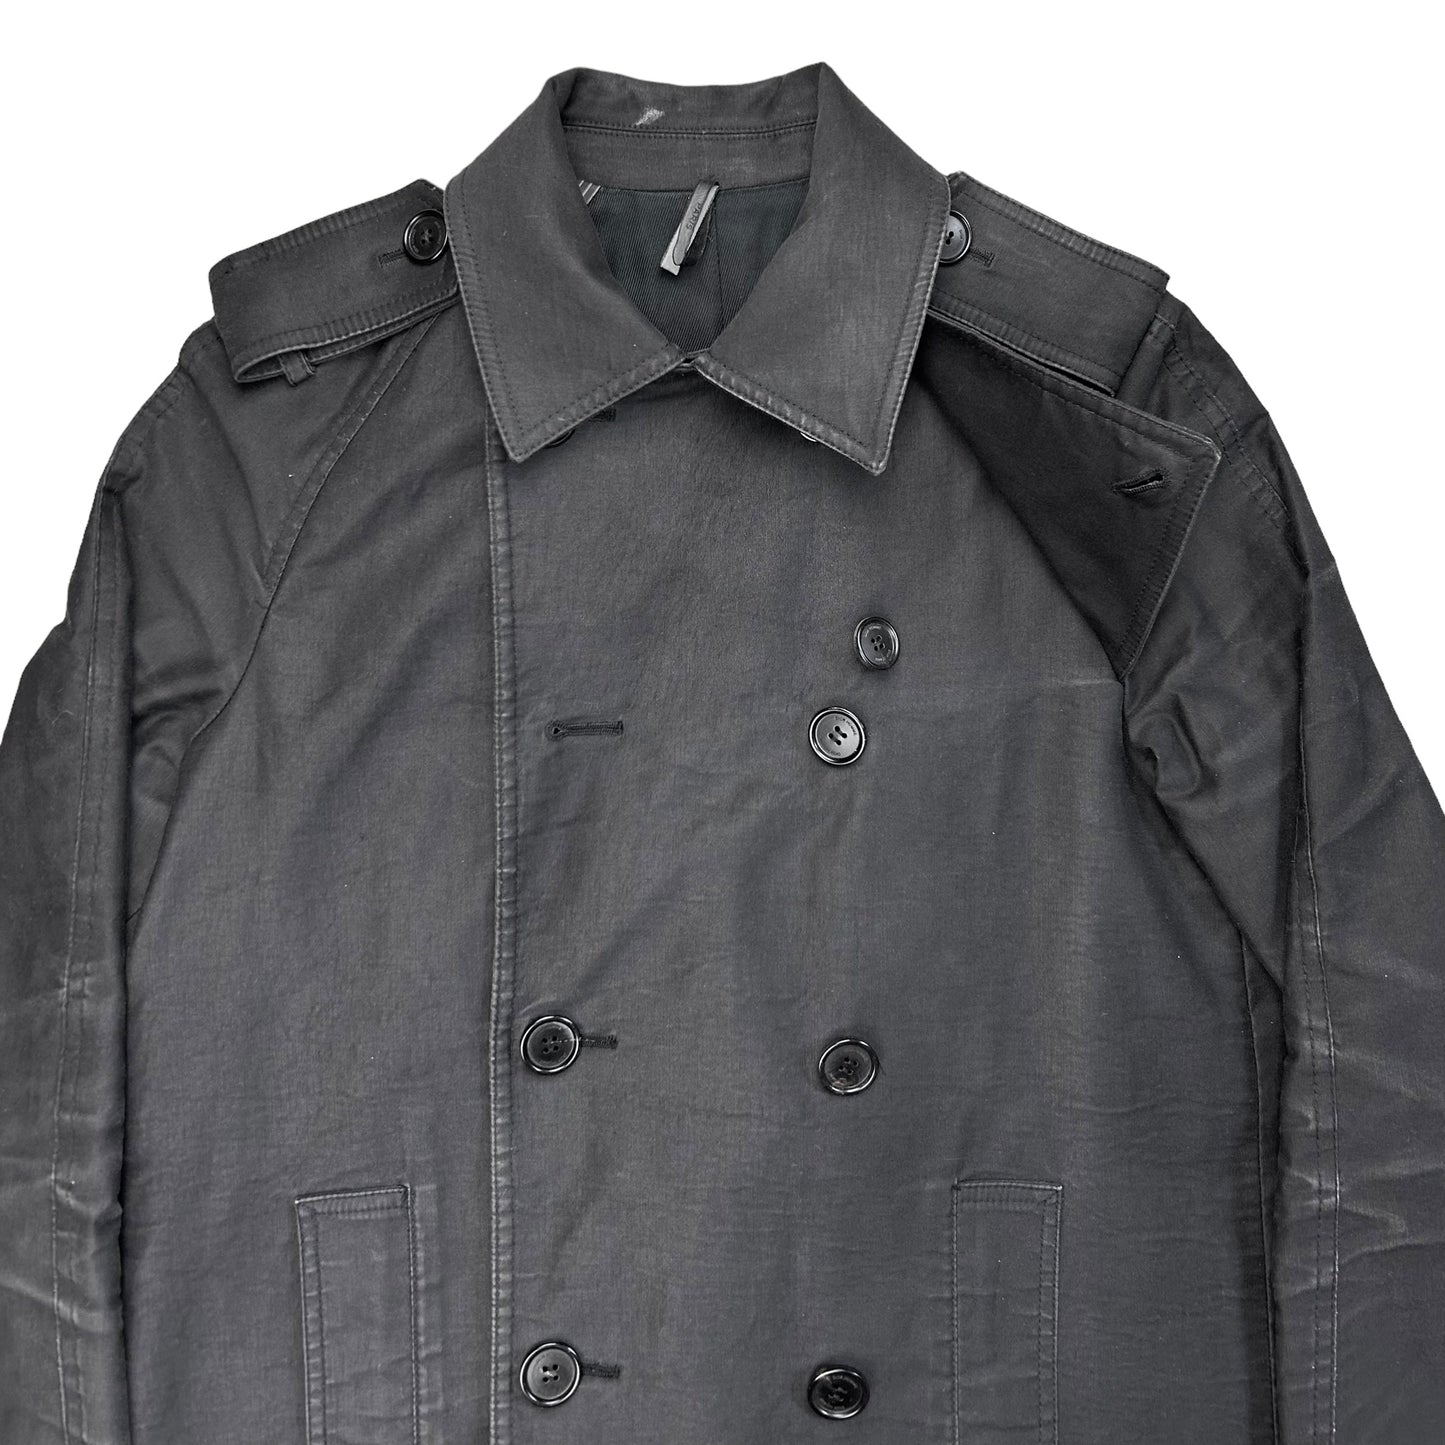 Dior Homme Short Double Breasted Military Trench Coat - SS07